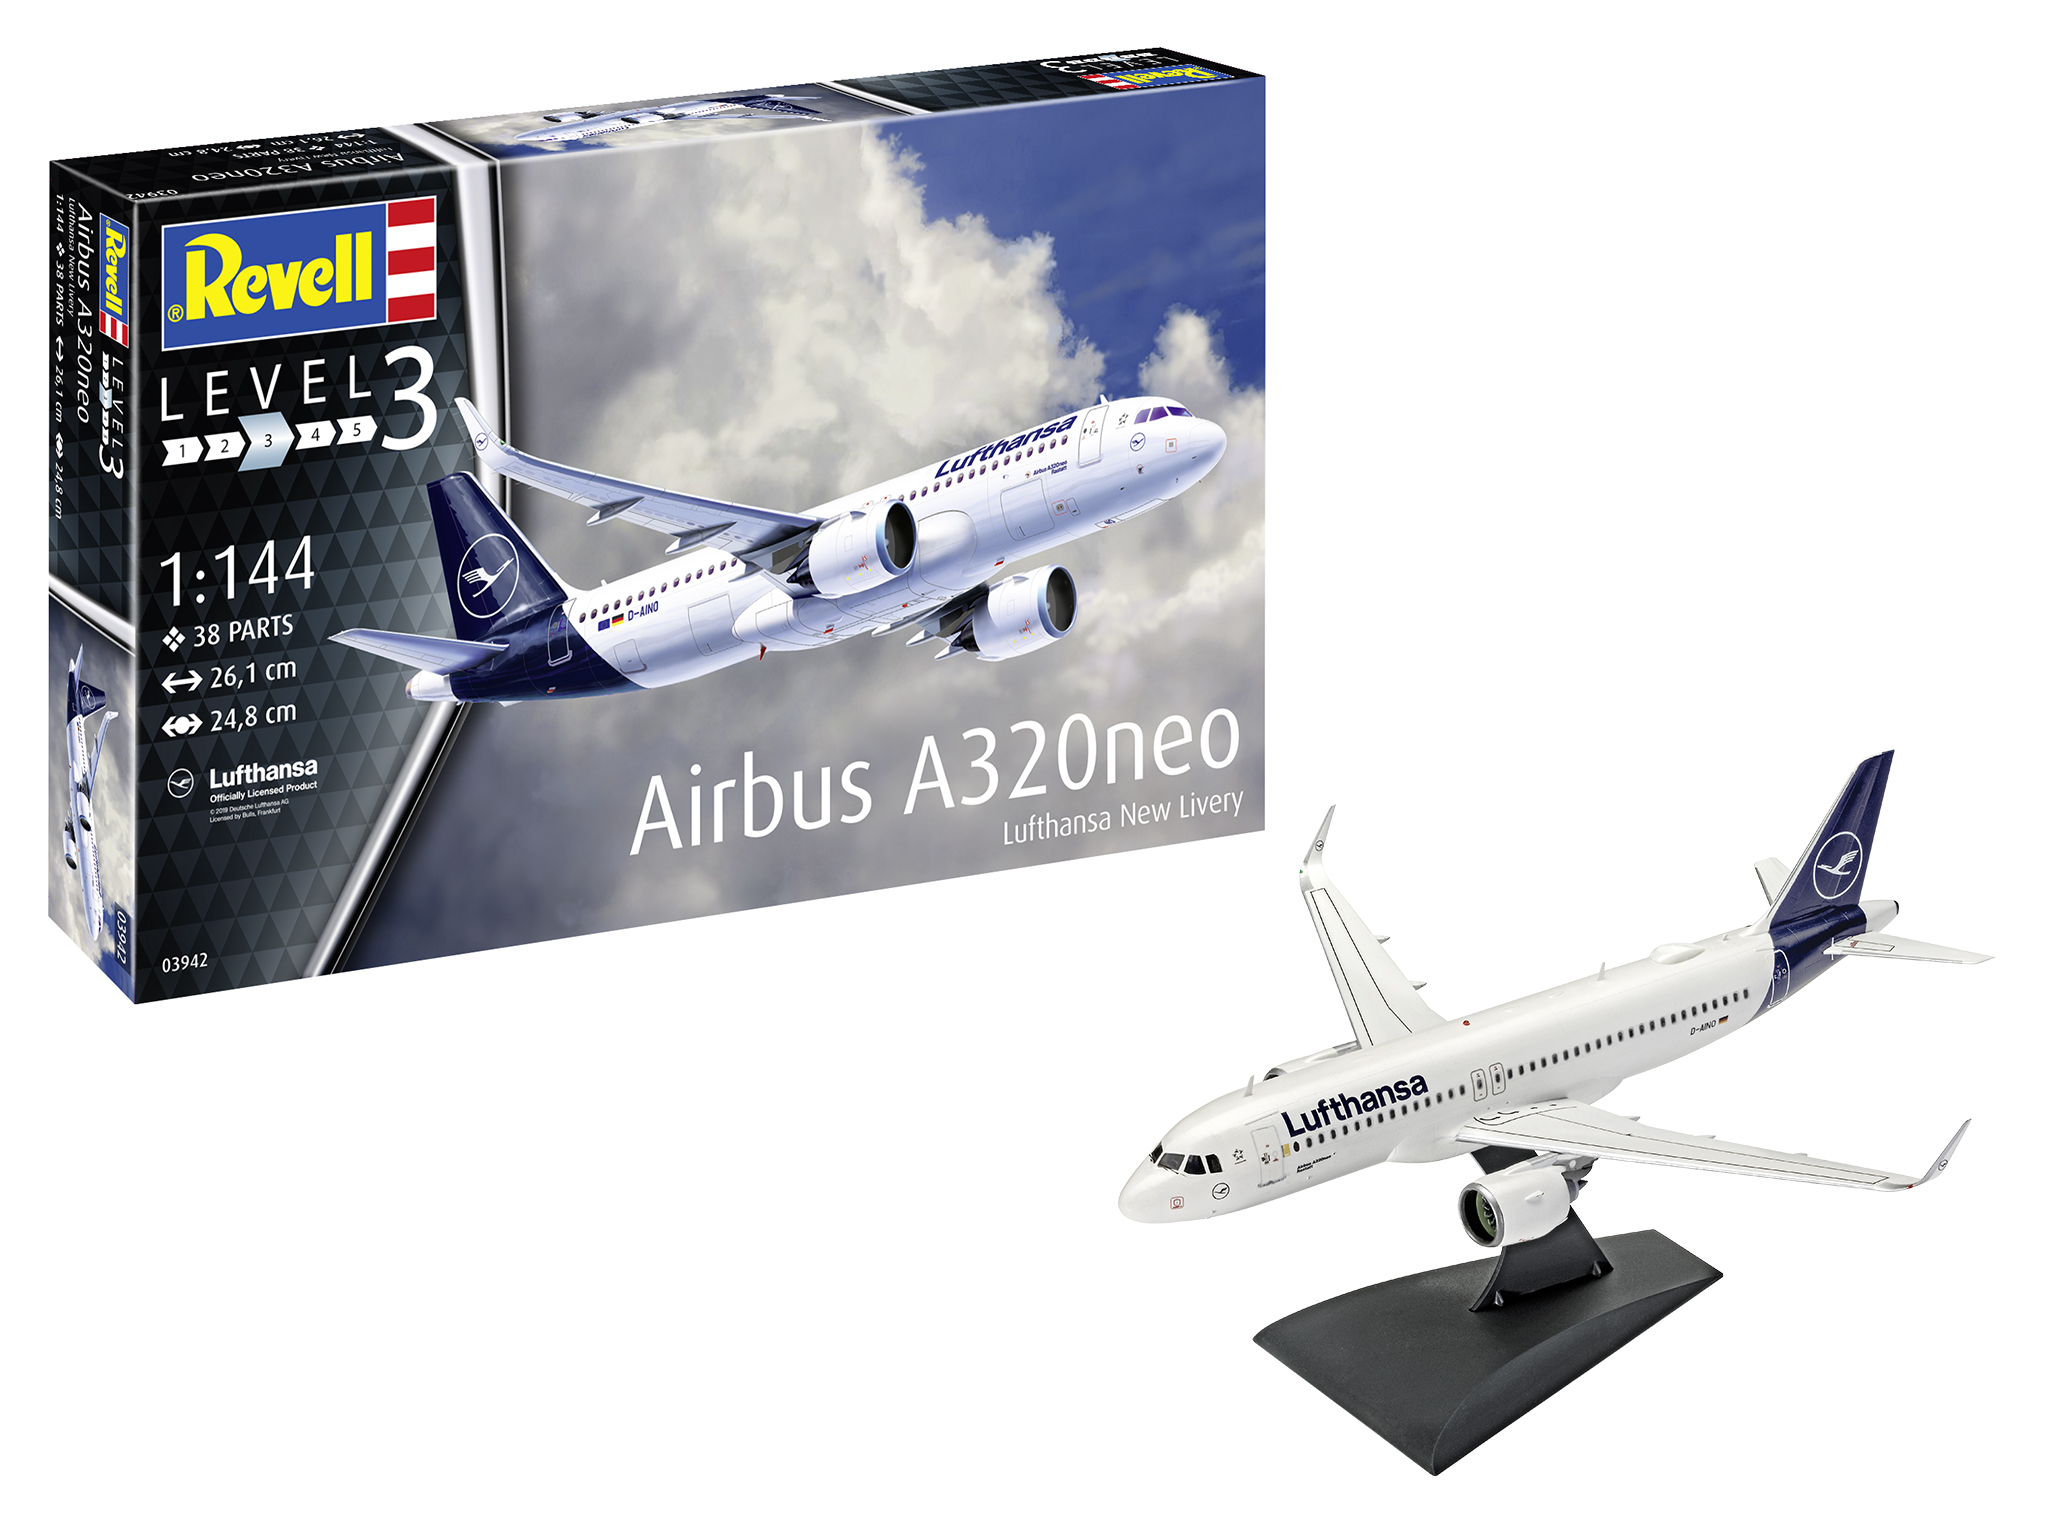 Revell Airbus A320 Neo Lufthansa "New Livery" in 1:144 bouwpakket